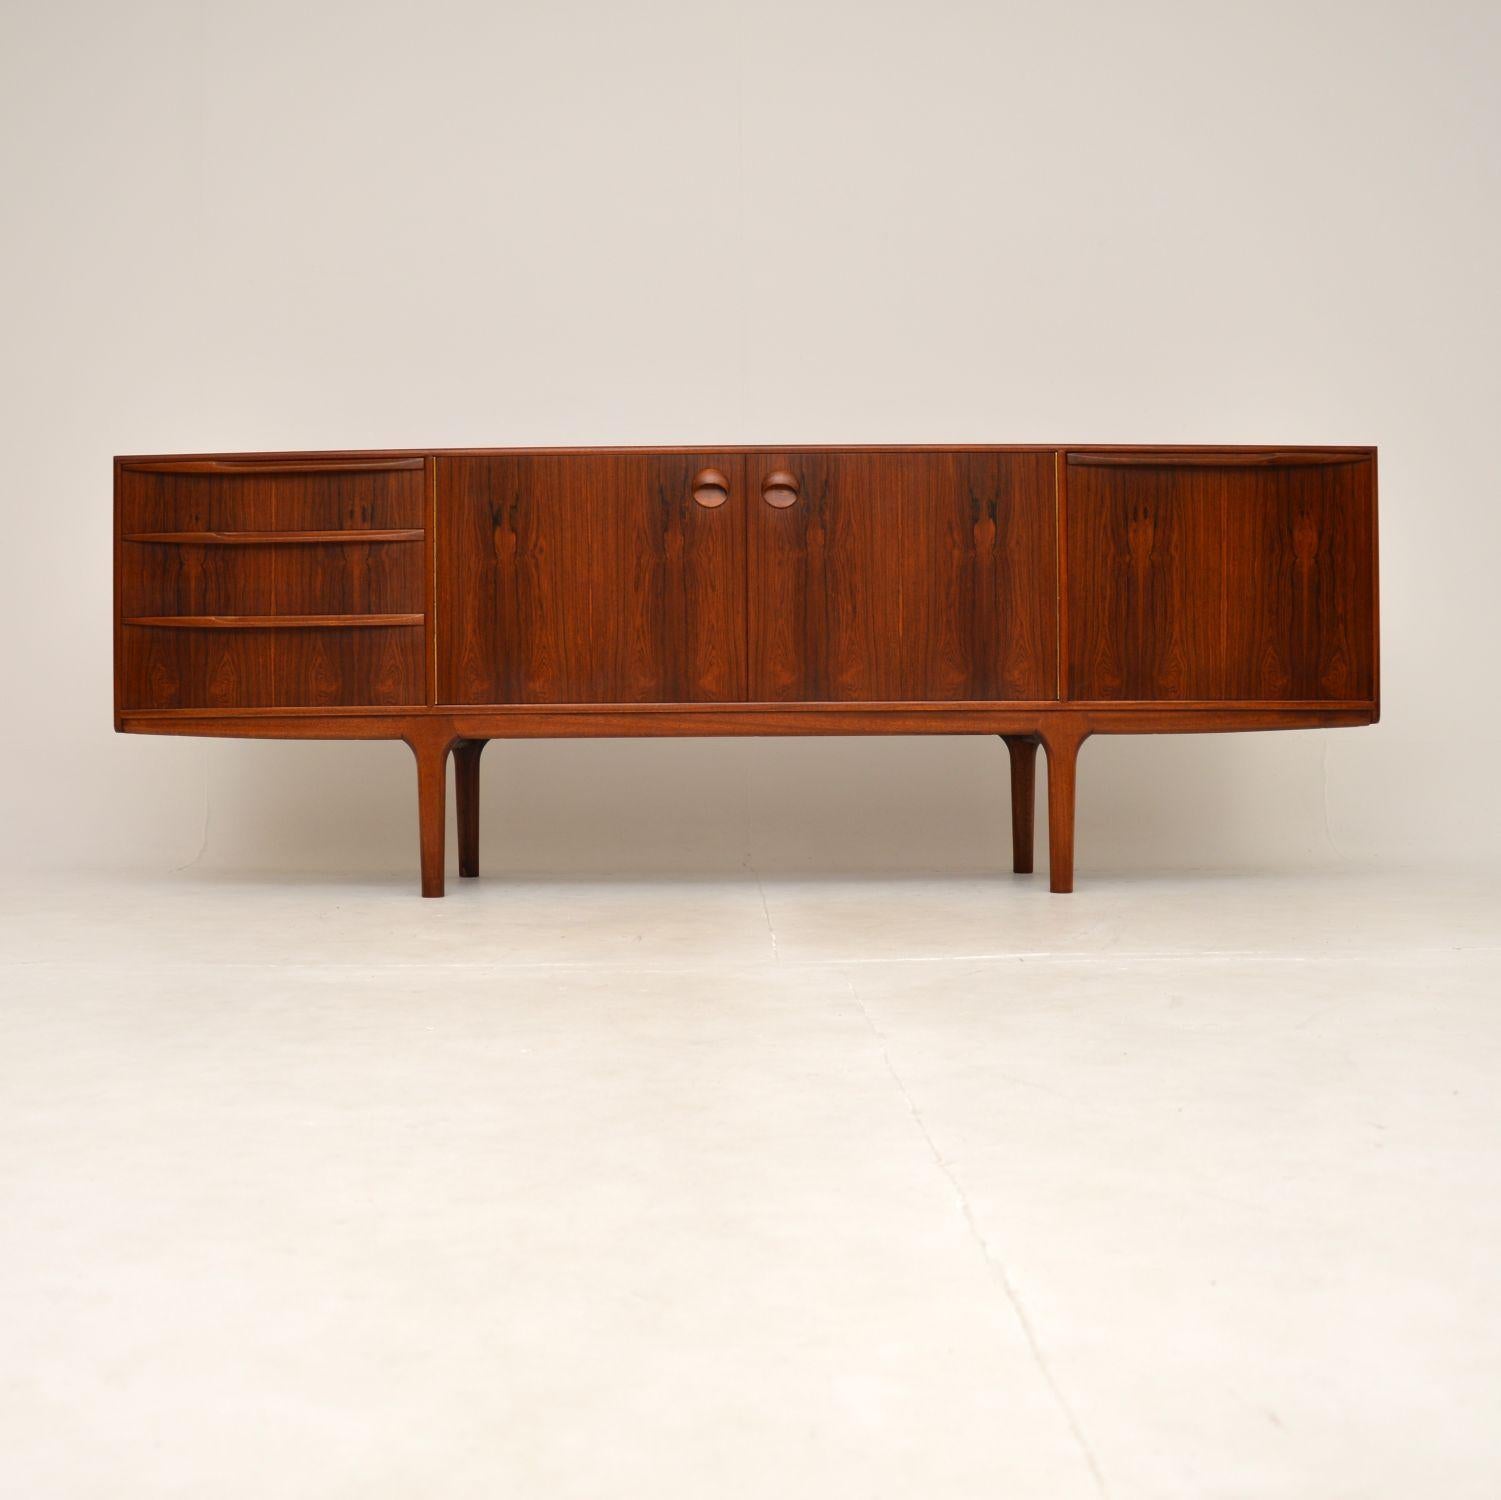 A very stylish and highly sought after vintage sideboard by McIntosh. This model is called the Dunfermline, it was designed by Tom Robertson and made in Scotland in the 1960’s.

It is of superb quality and is beautifully designed, with absolutely